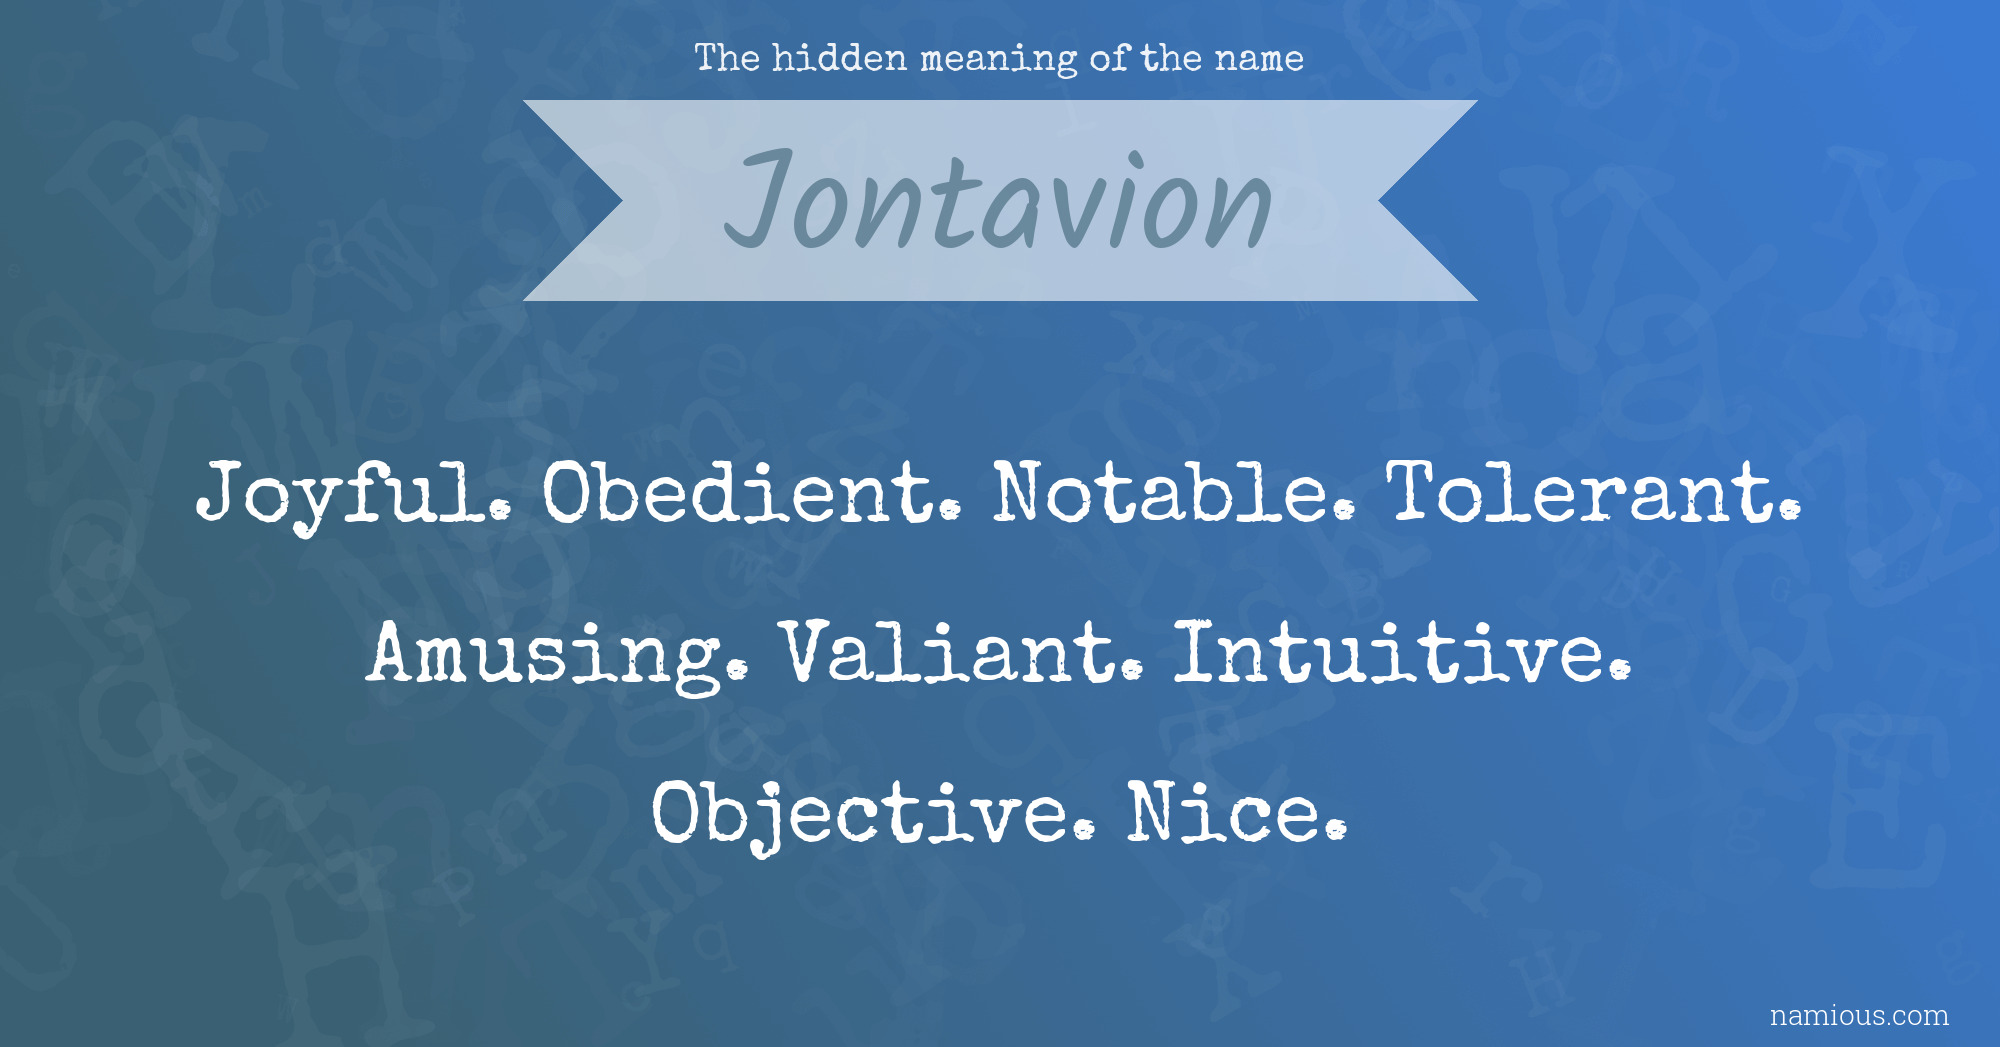 The hidden meaning of the name Jontavion